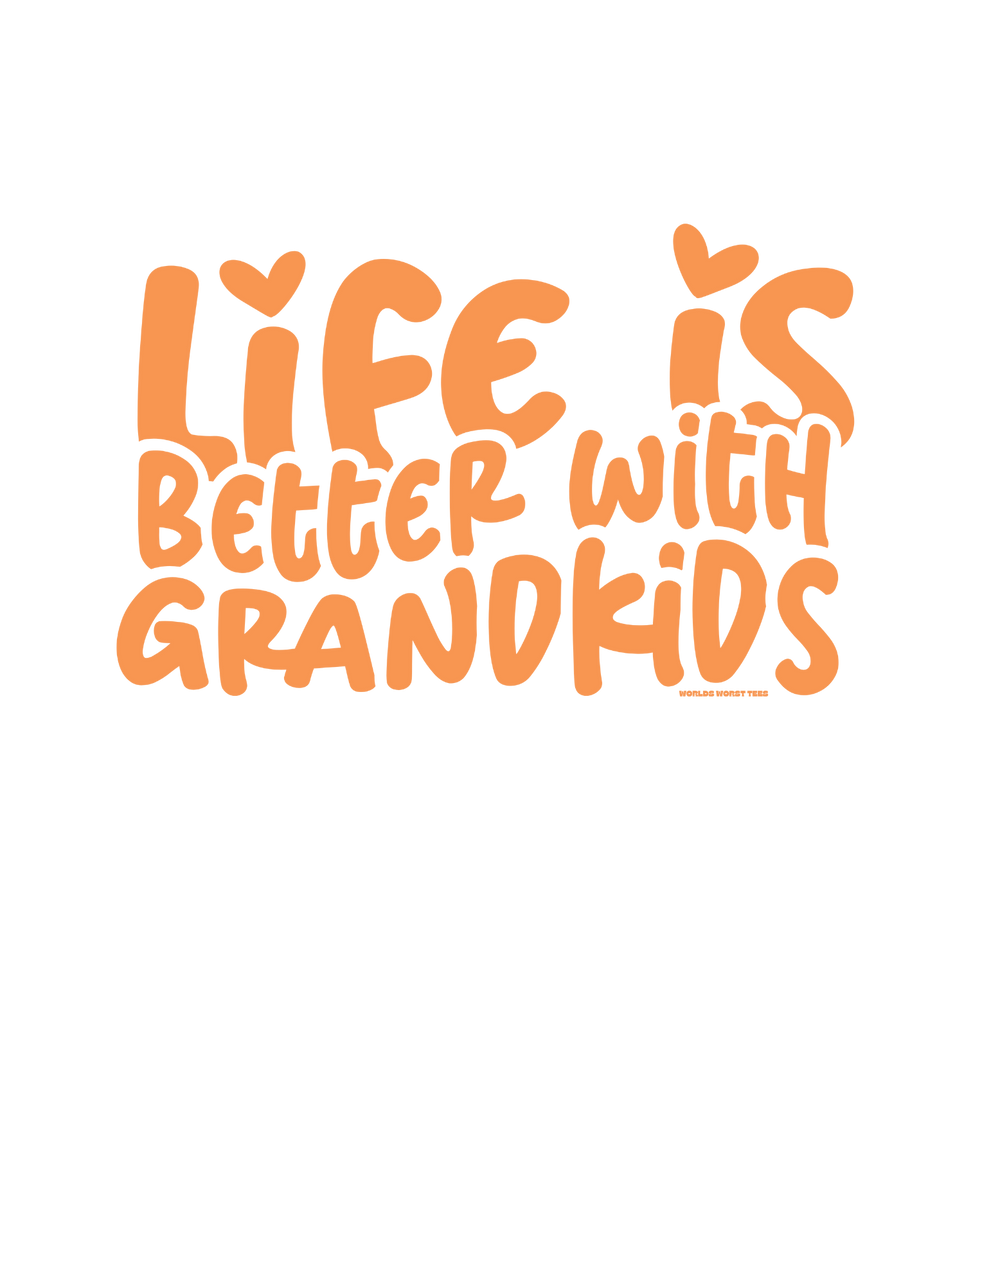 Unisex Life is Better With Grandkids Crew sweatshirt. 50% cotton, 50% polyester blend, ribbed knit collar, loose fit, sewn-in label. Sizes S-5XL. Comfortable, no itchy side seams.